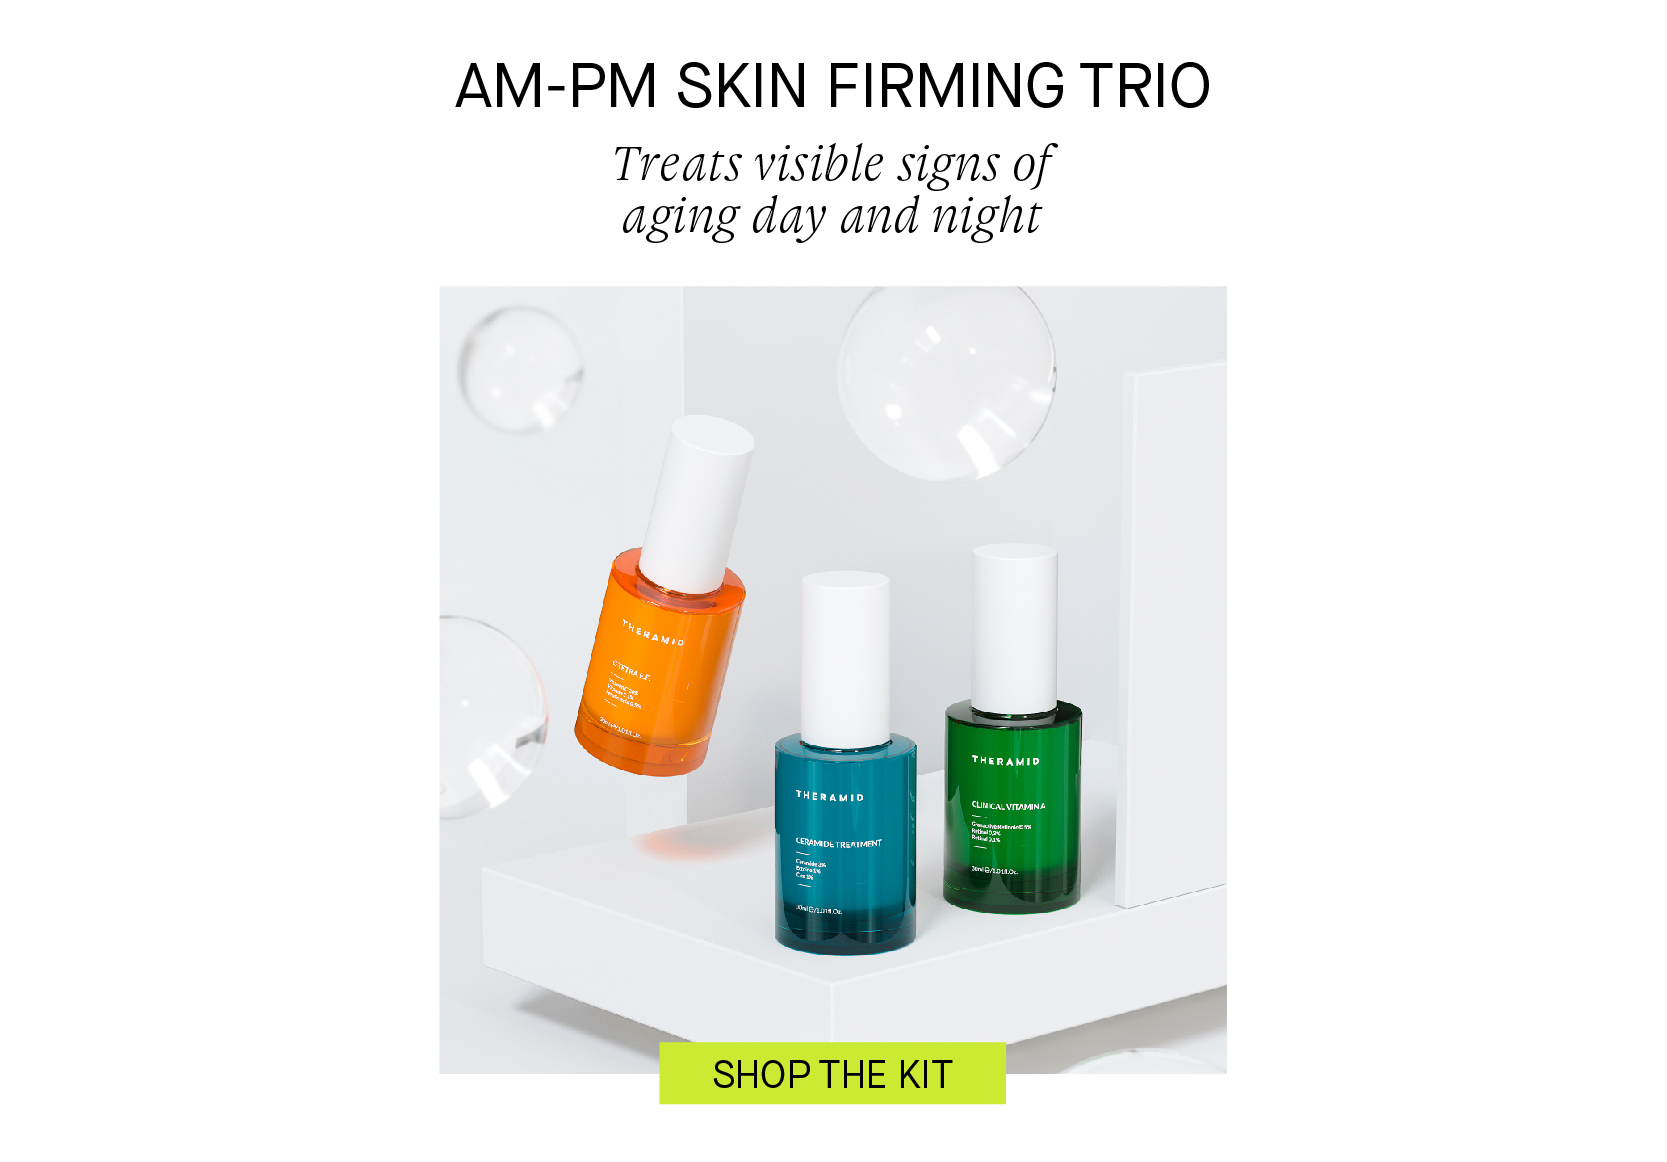 AM-PM SKIN FIRMING TRIO Treats visible signs of aging day and night 